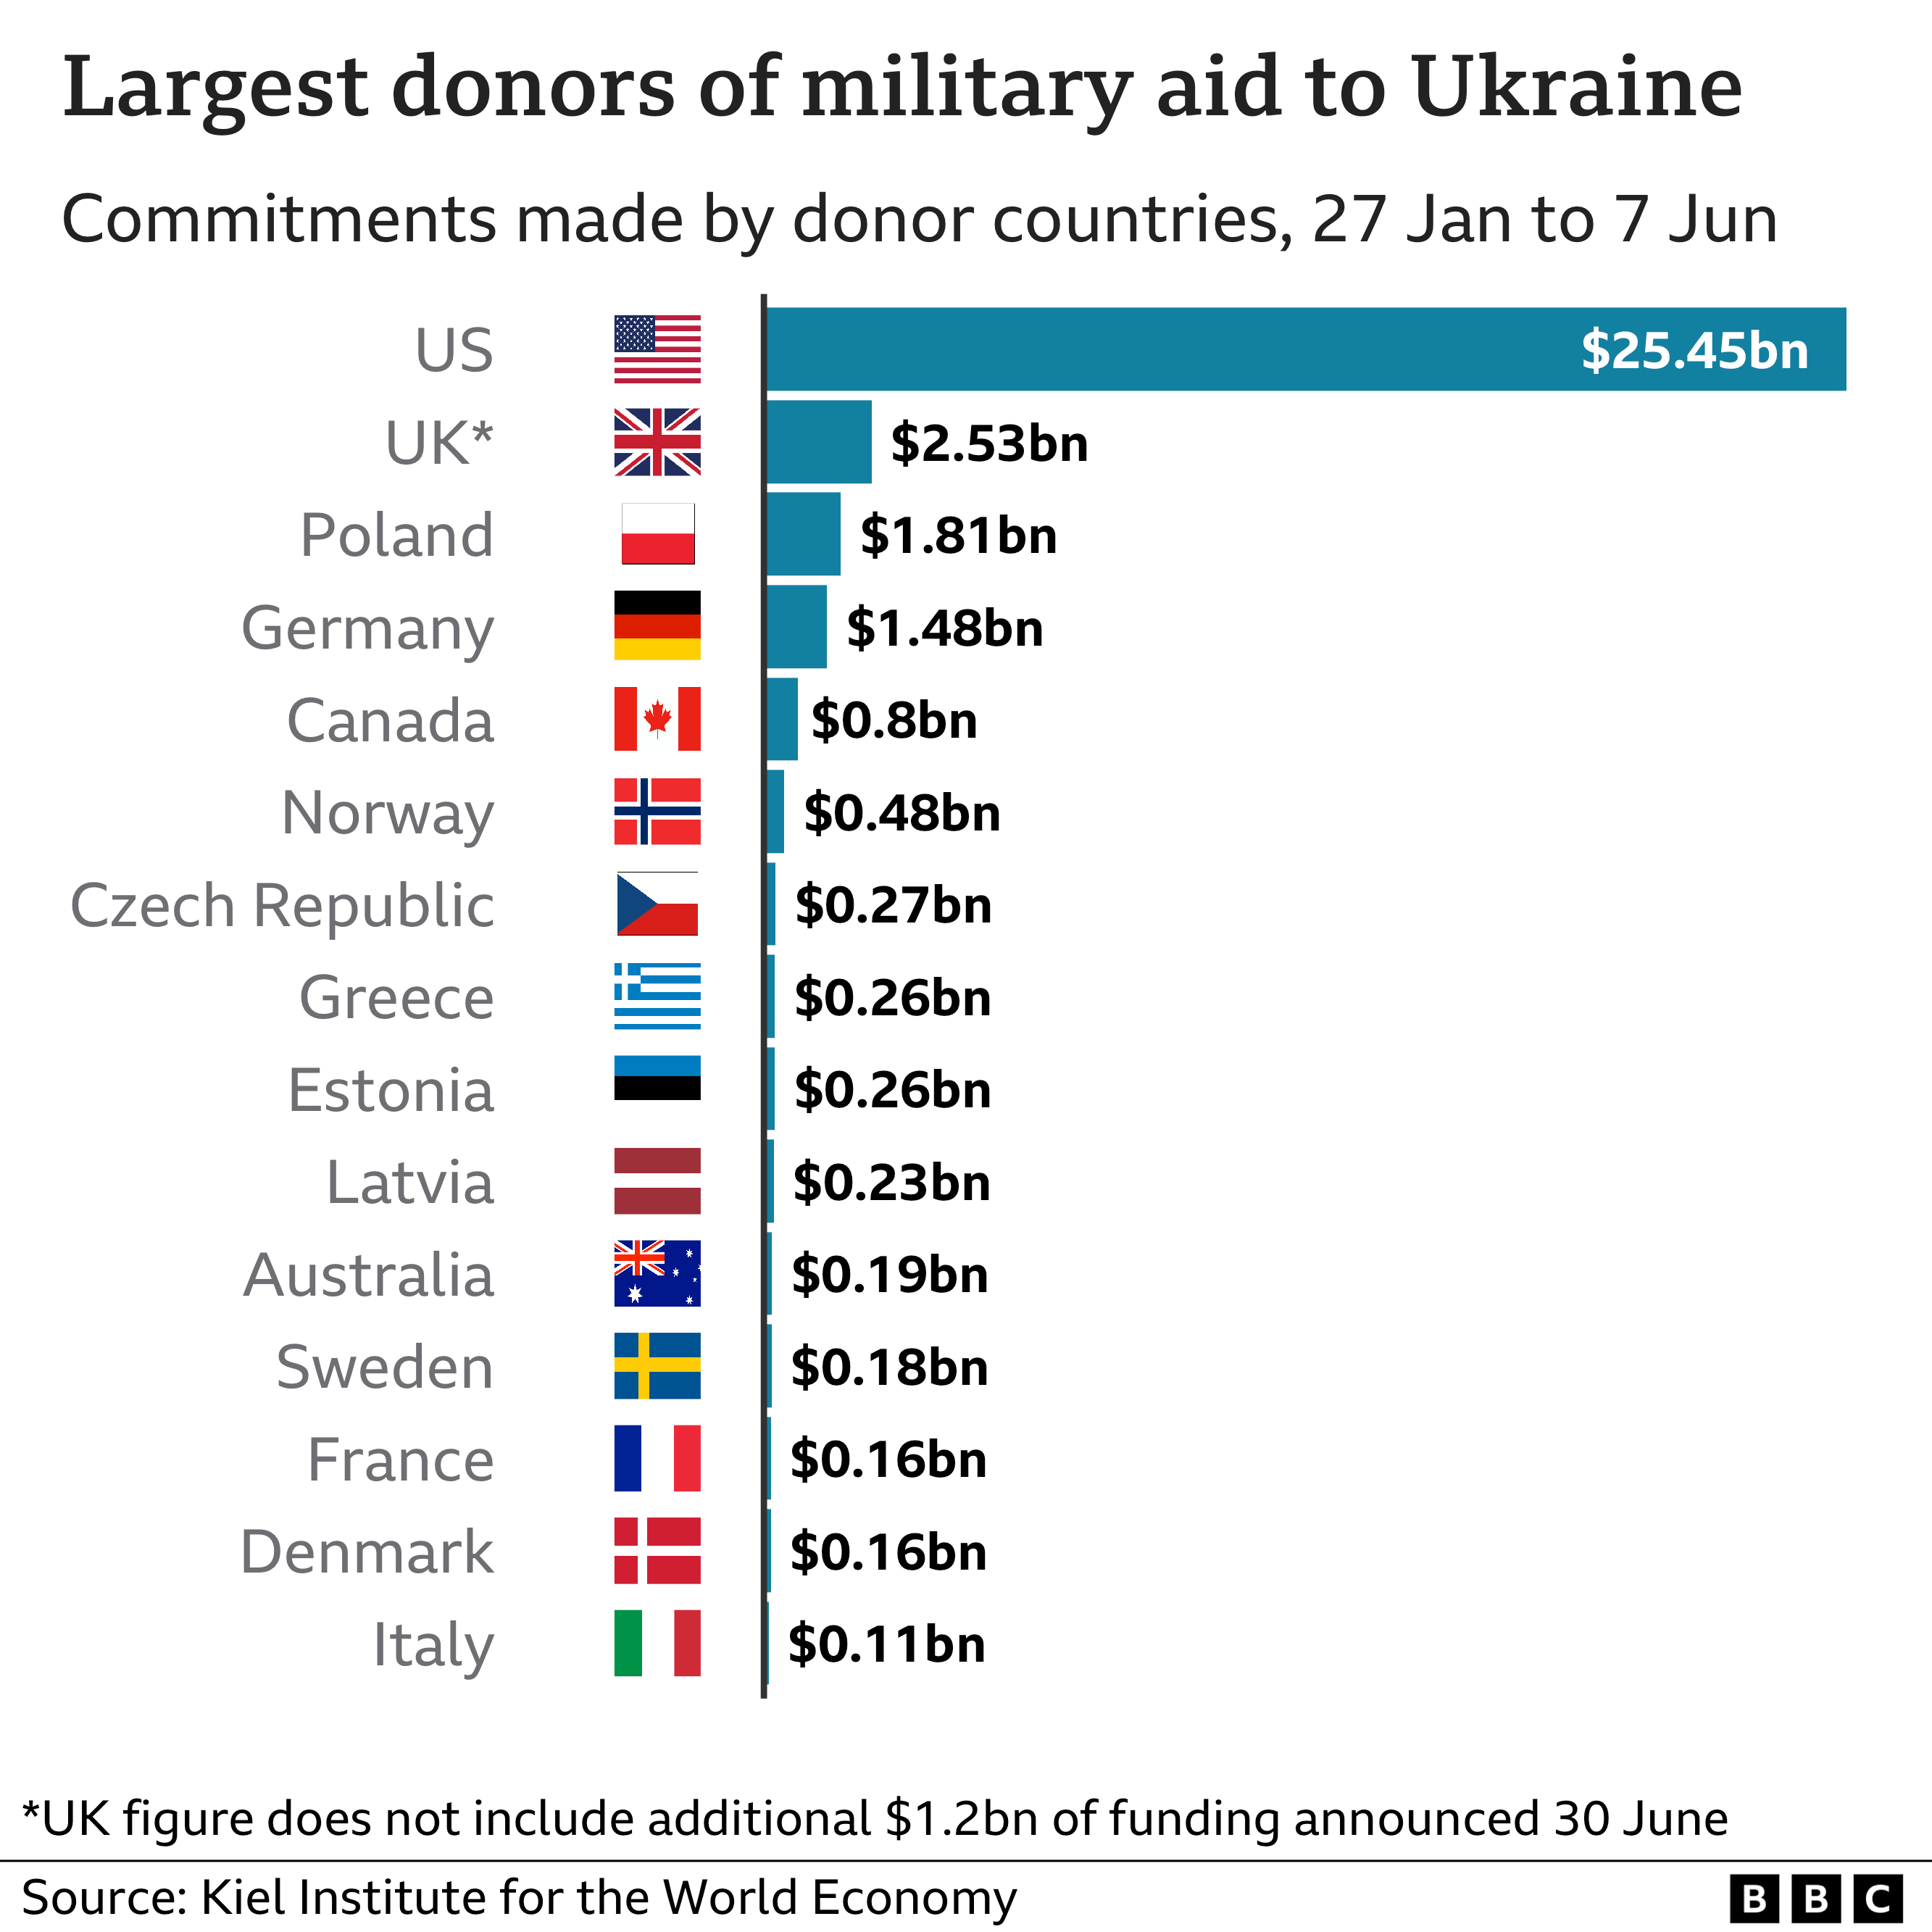 Chart showing largest donors of military aid to Ukraine